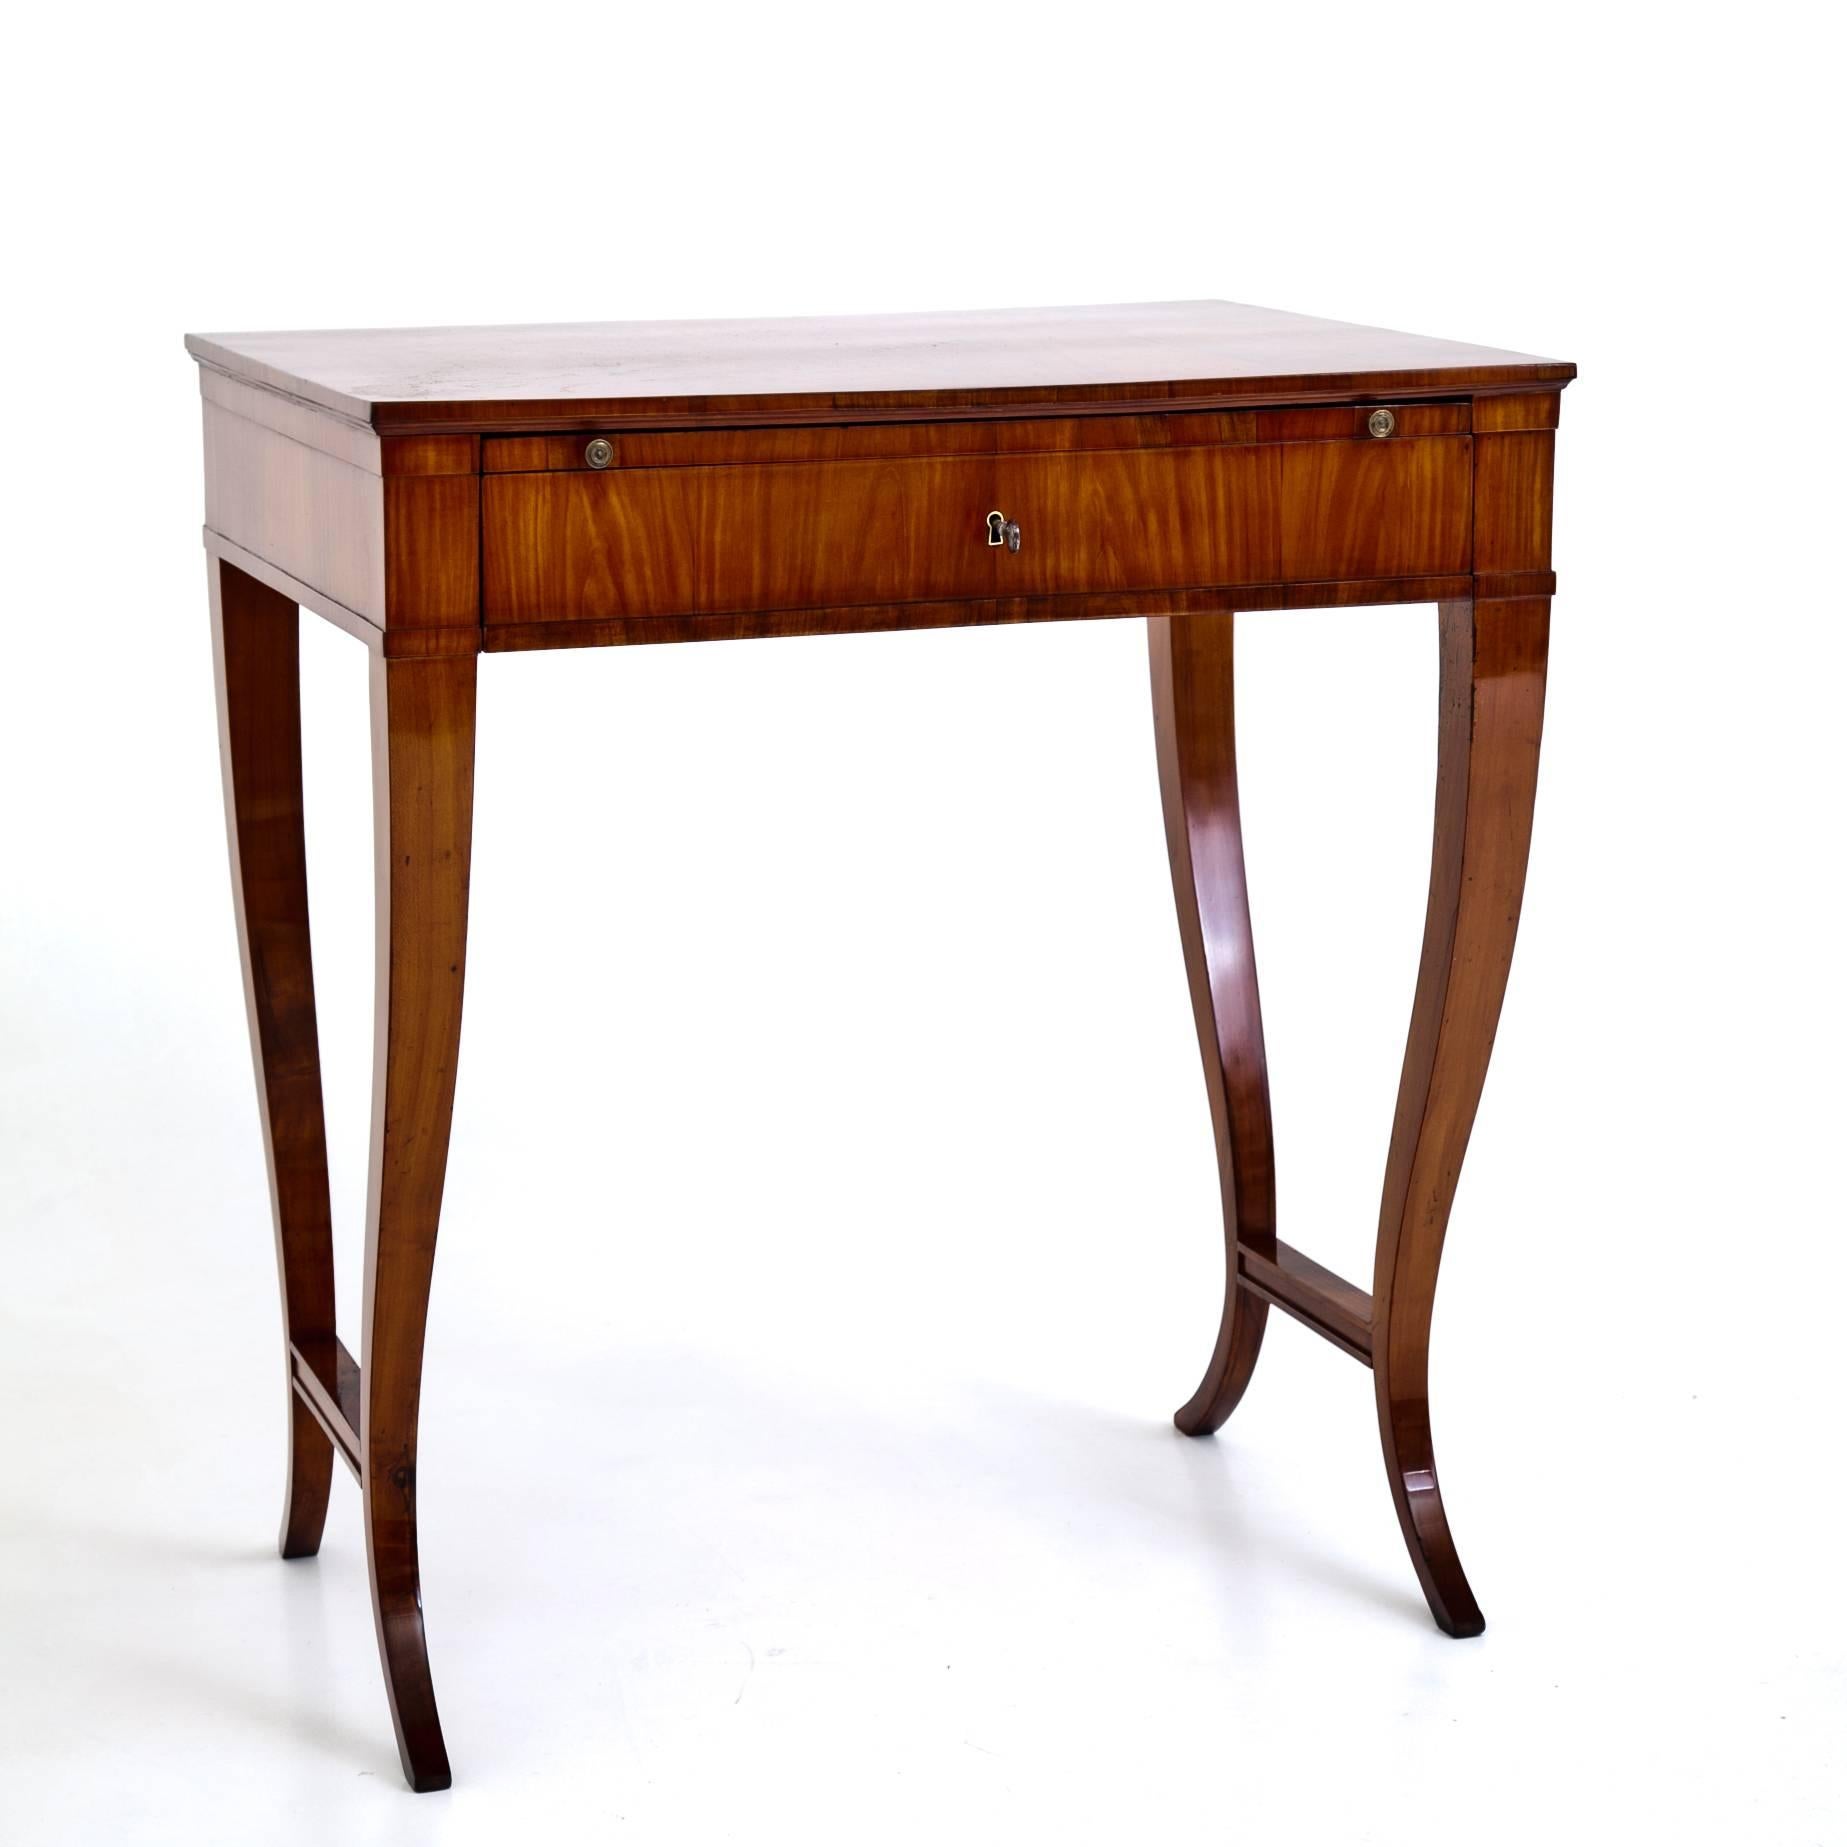 Elegant Biedermeier writing table out of cherrywood, standing on curved legs with connecting stretchers. The large drawer has three more small drawers towards the back. Above is a pull-out writing surface, covered with black leather.